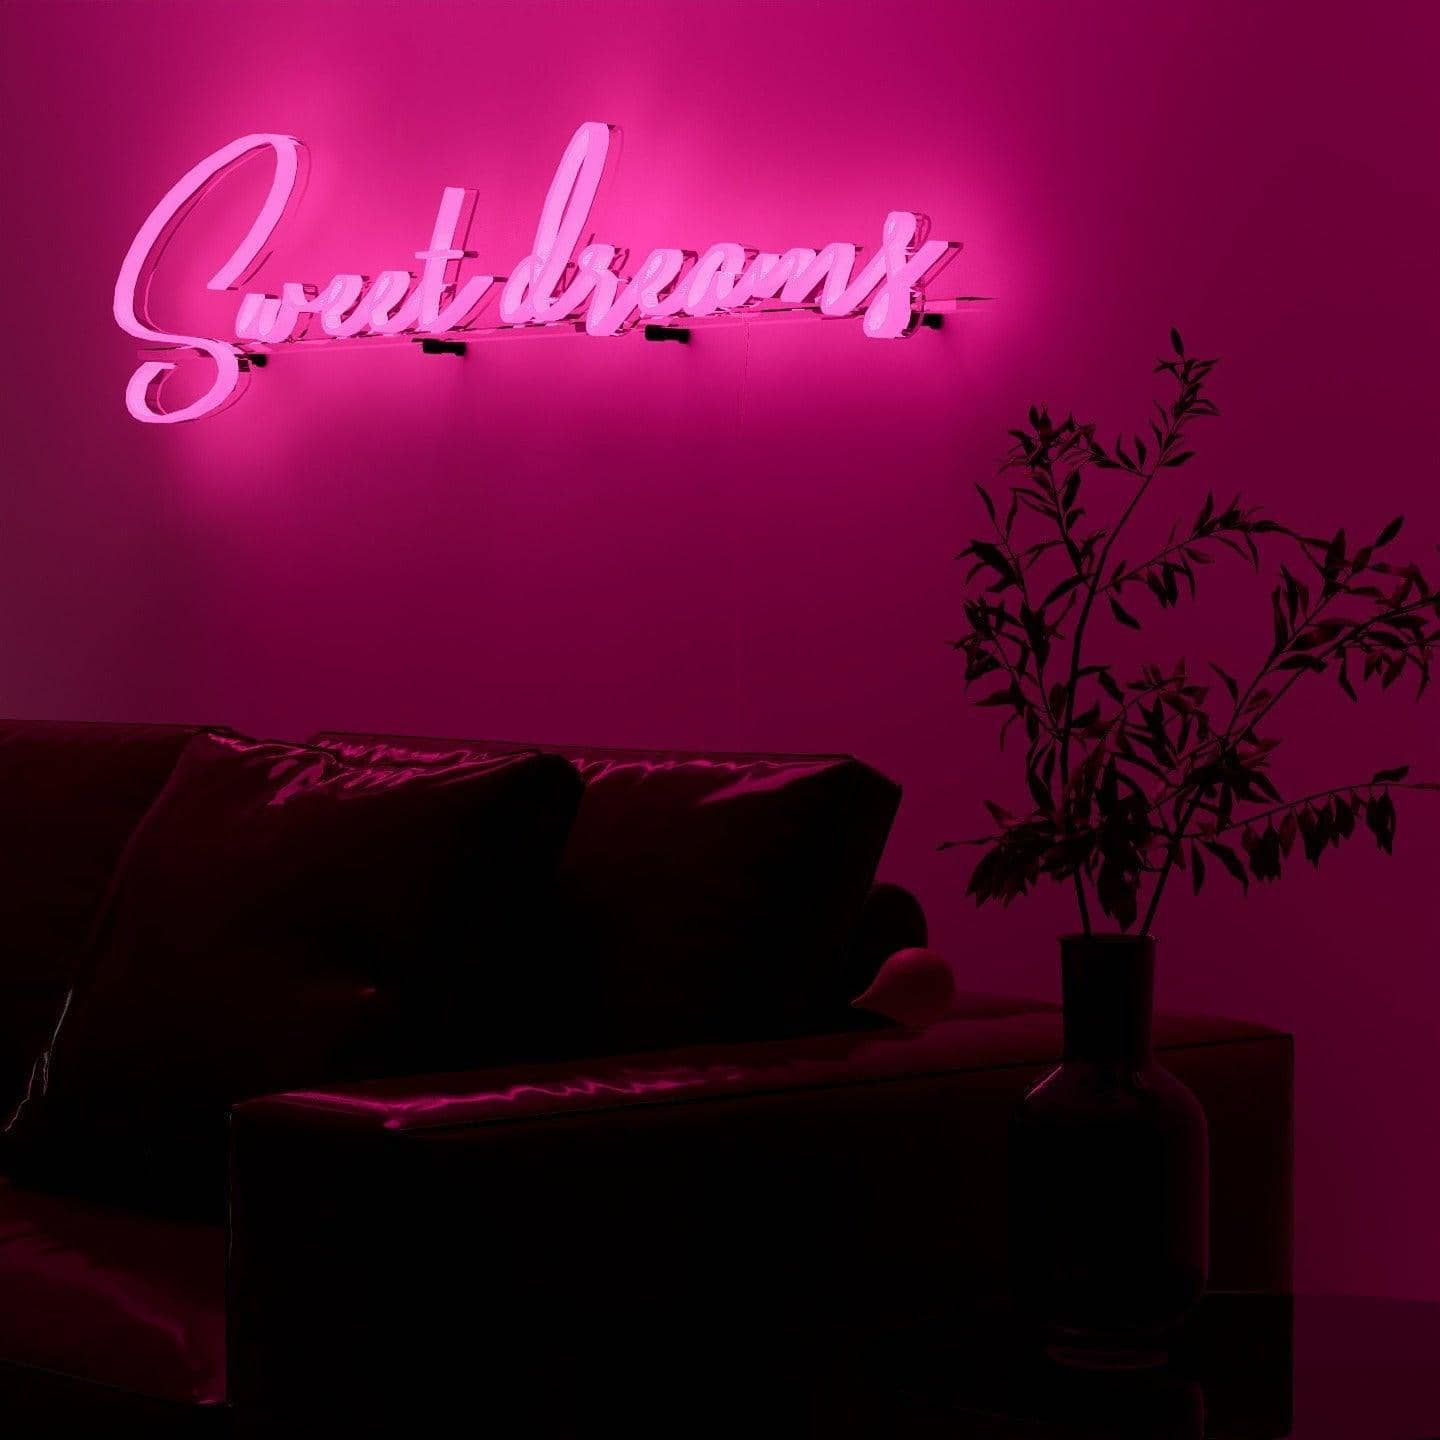 dark-night-lit-pink-neon-lights-hanging-on-the-wall-for-display-sweet-dreams